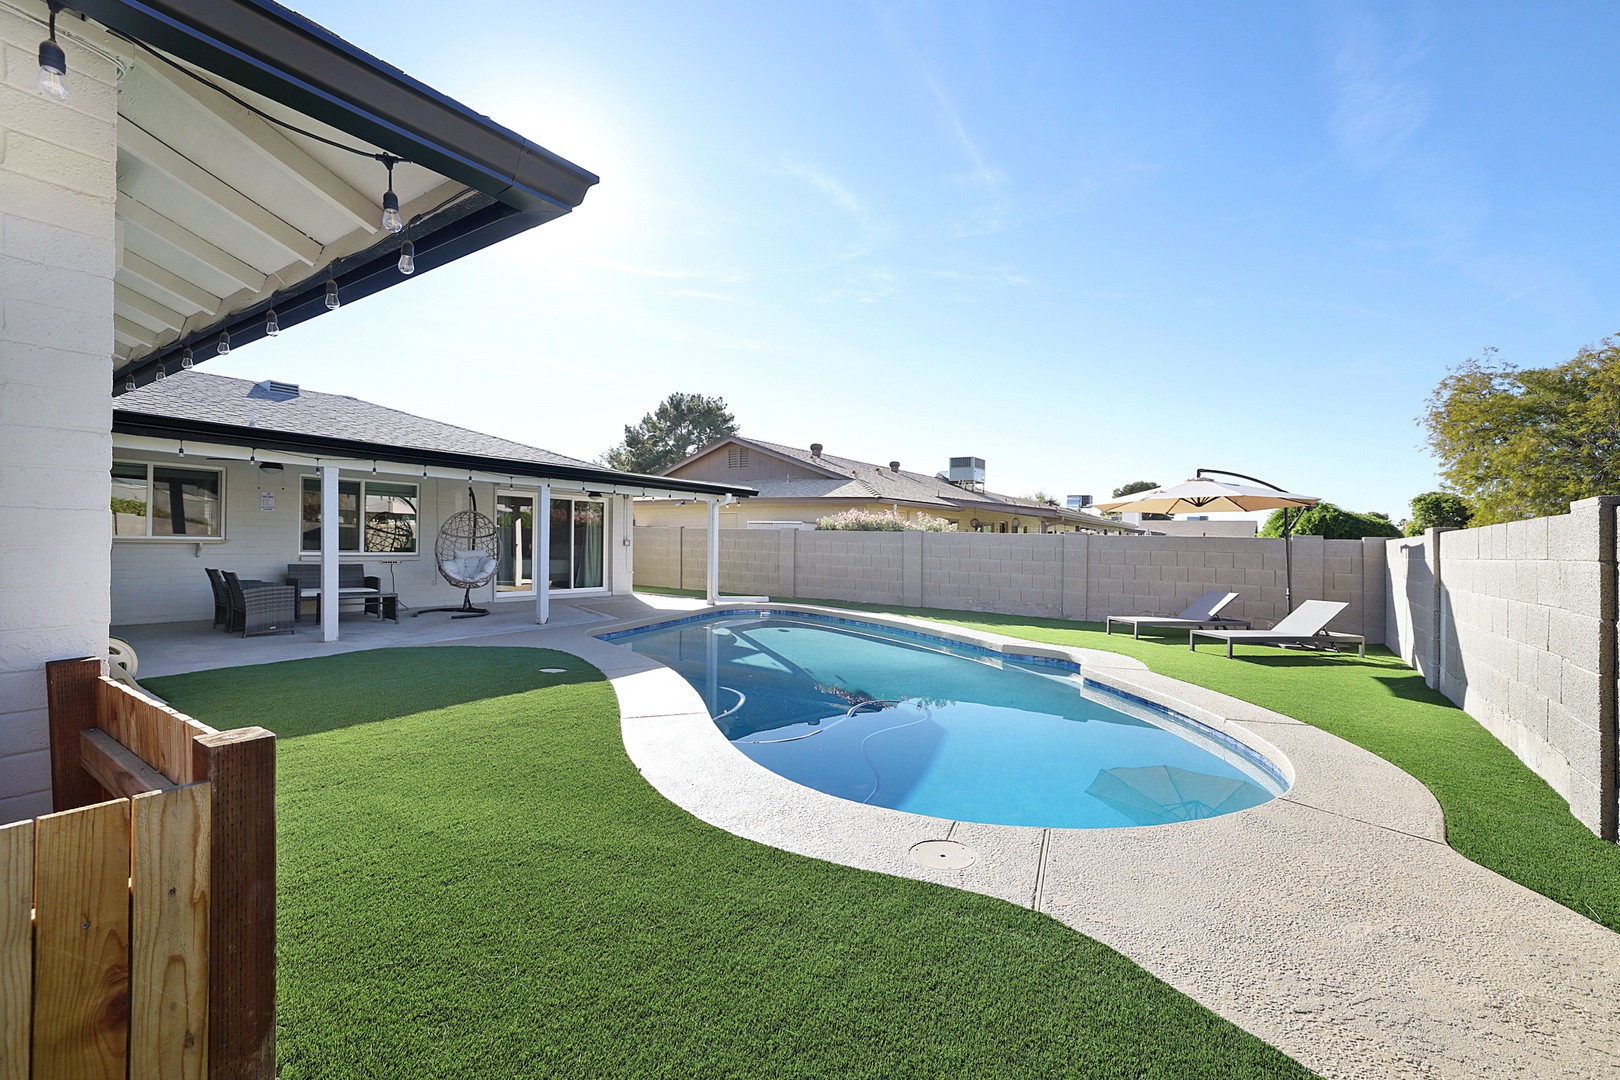 Comfortable patio and backyard with sparkling pool (newly resurfaced Nov 2020!). Enjoy the sun on the lounge chairs or relax in the addictive egg chair!